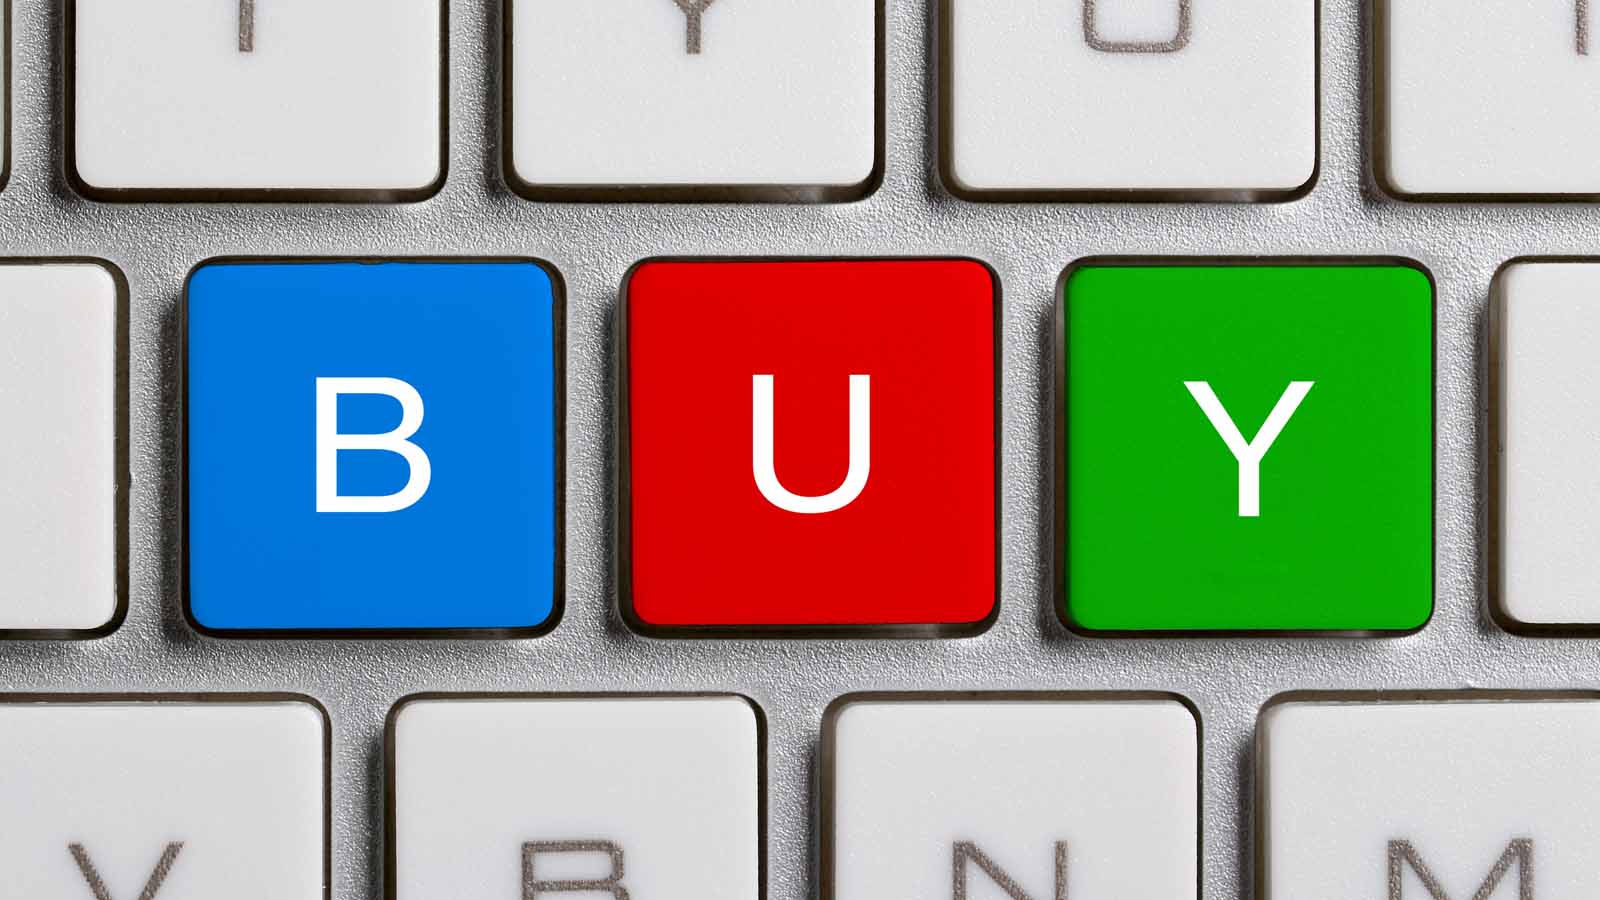 3 Stocks to Buy and Hold for the Next 50 Years